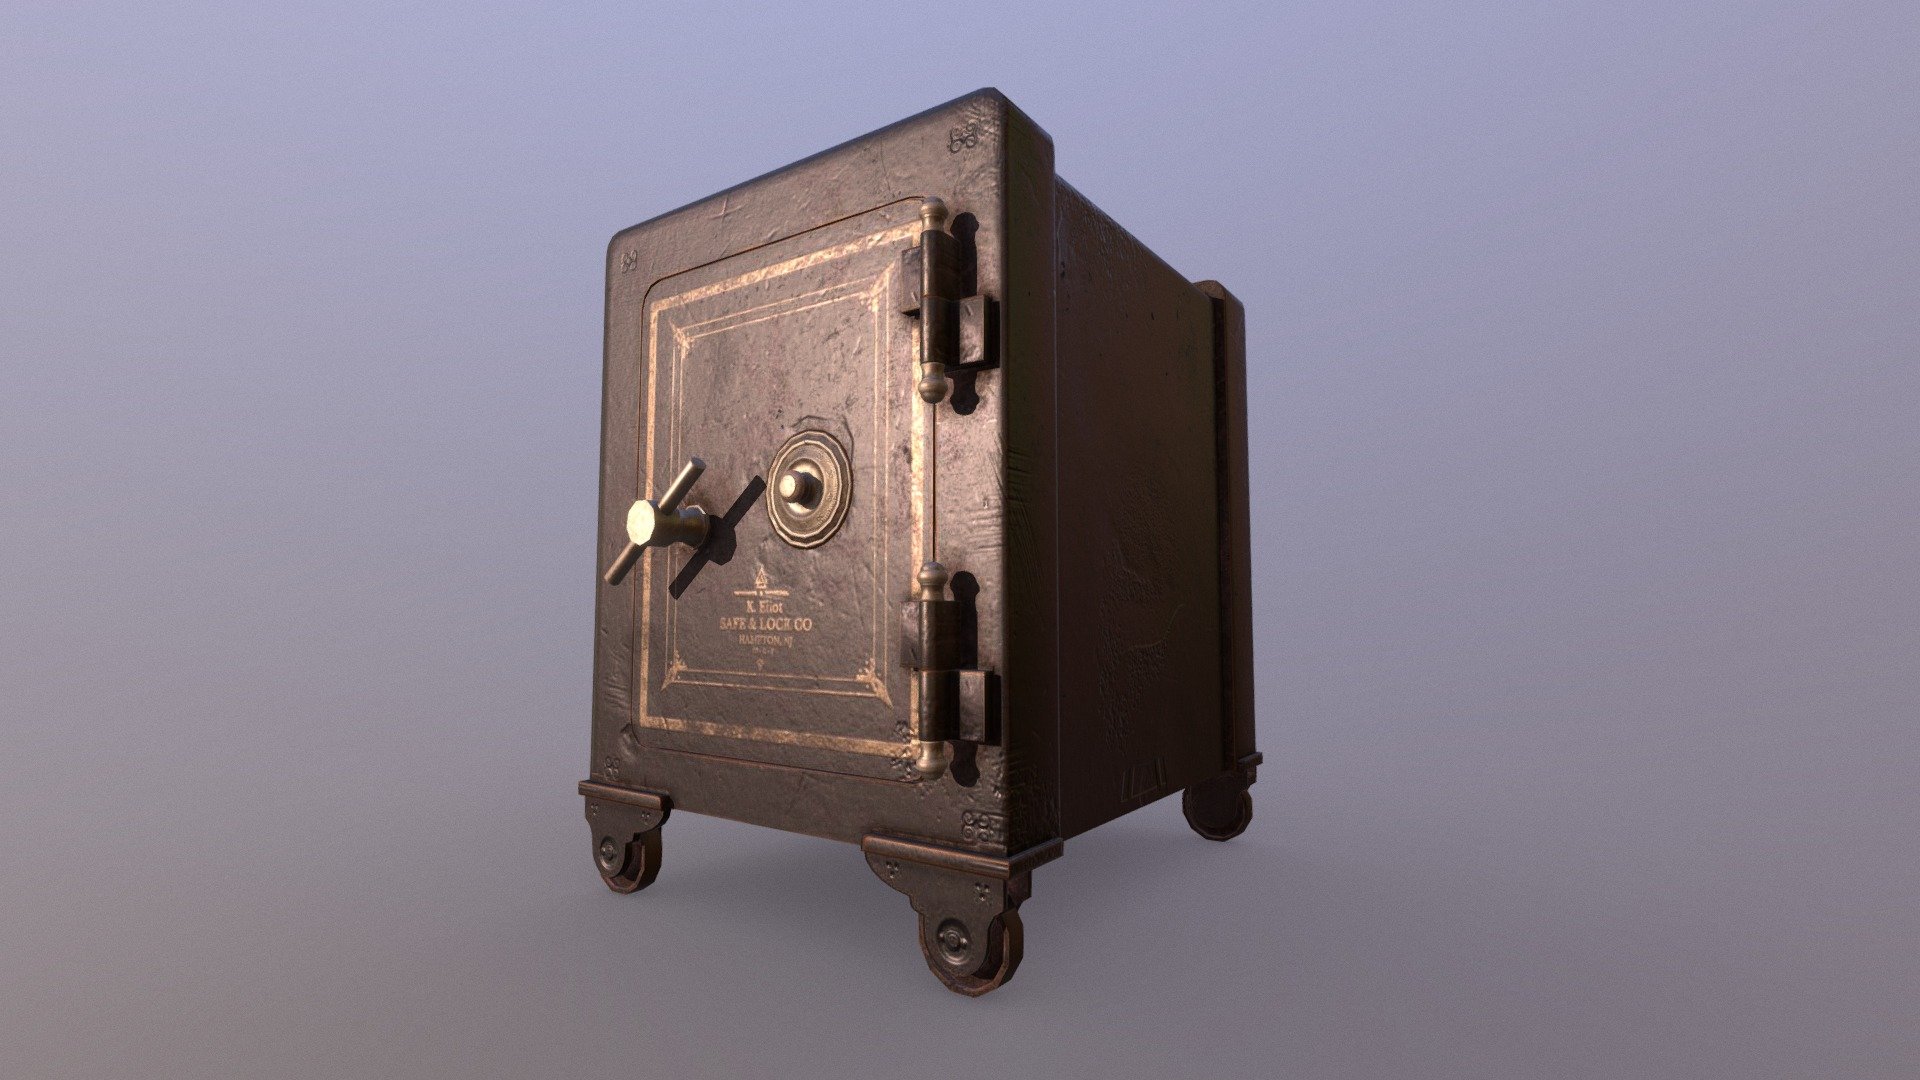 It's a grand ol' safe where valuables can be stored! Built for an scene I'm making in the old west while trying to learn Substance Painter. 

Update: Now with proper roughness and also half the tris. 

Modeld In Blender, textured in Substance Painter 3d model